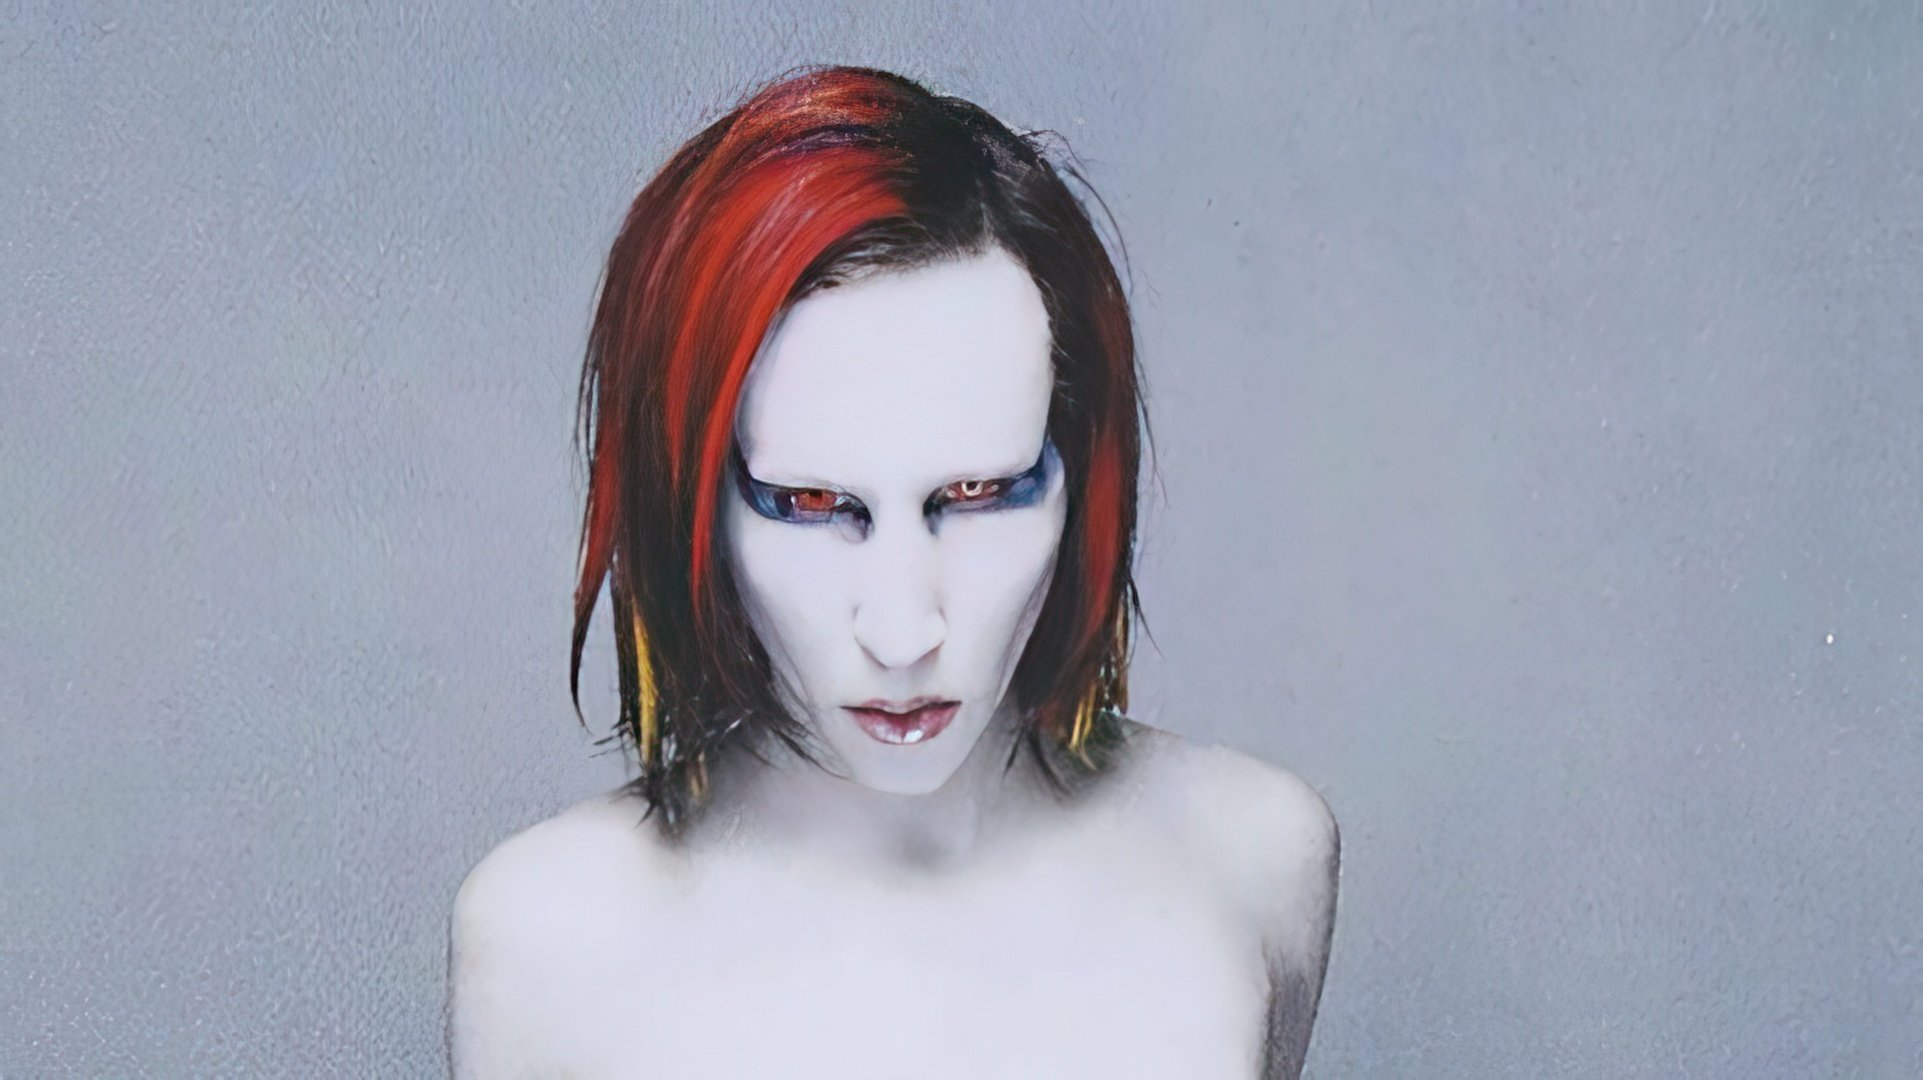 The era of Mechanical Animals: Manson uses the image of an androgyne